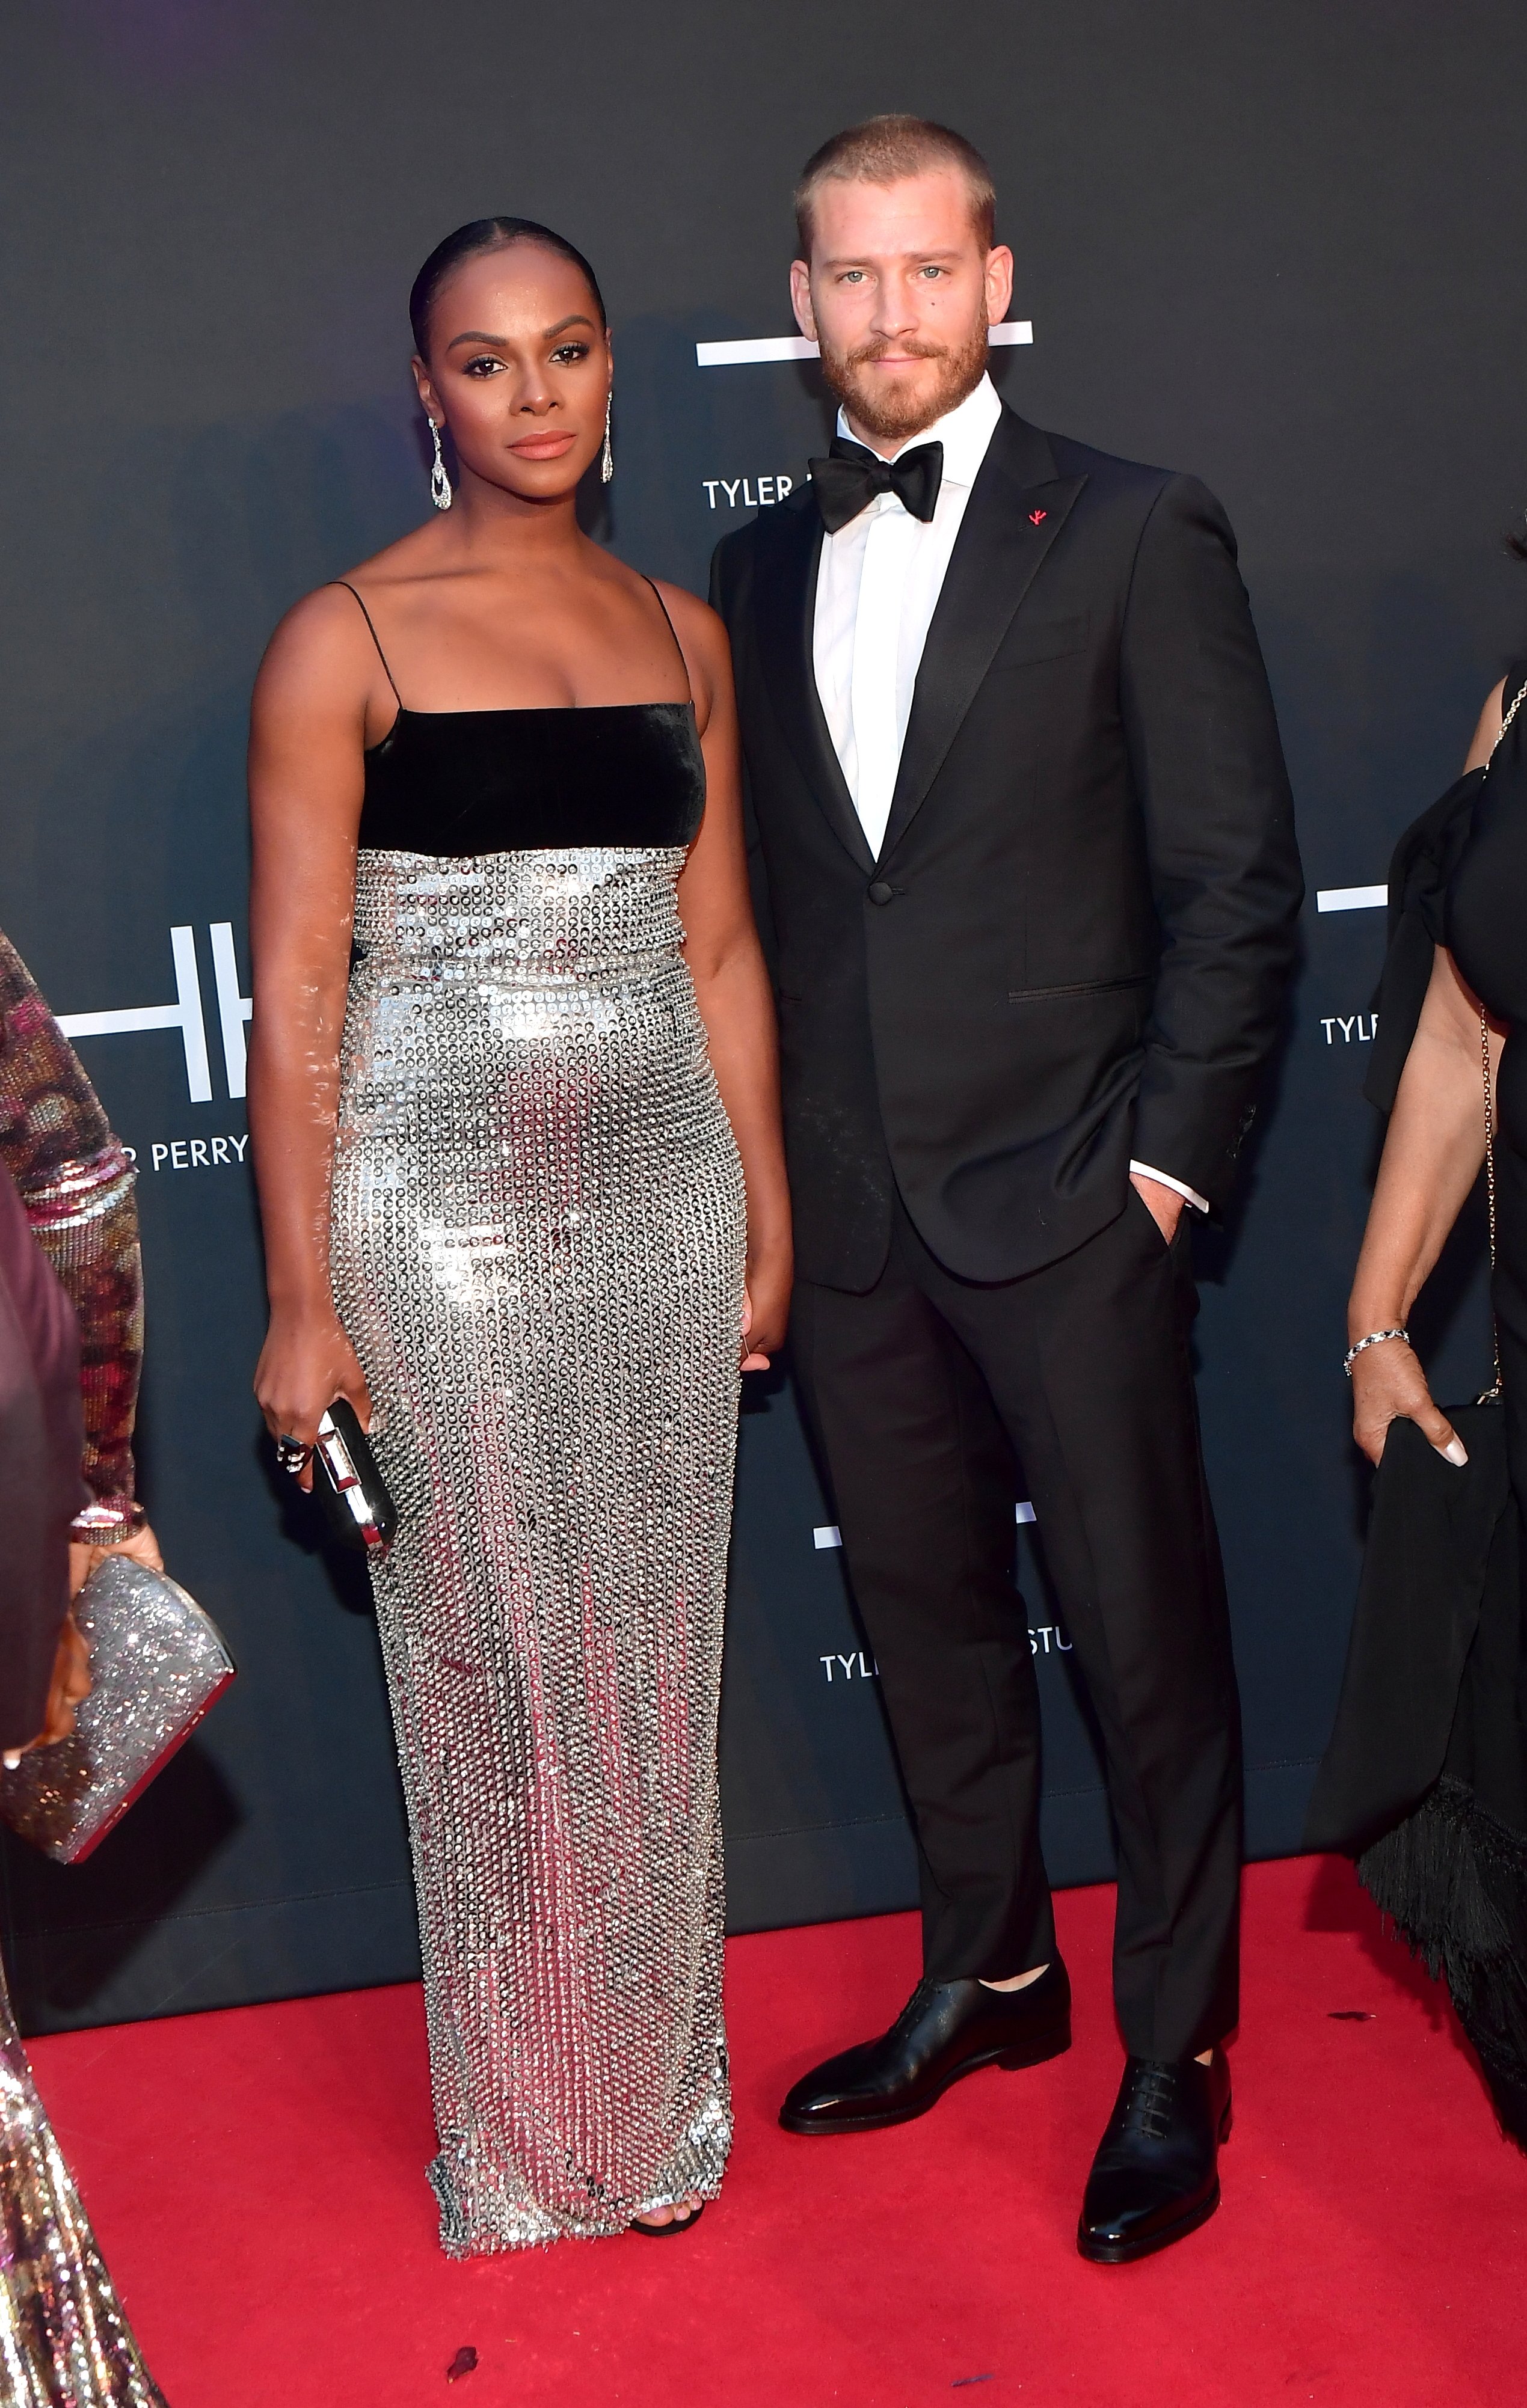 Tika Sumpter and Nicholas James during Tyler Perry Studios Grand Opening Gala - Arrivals at Tyler Perry Studios on October 5, 2019 in Atlanta, Georgia. / Source: Getty Images